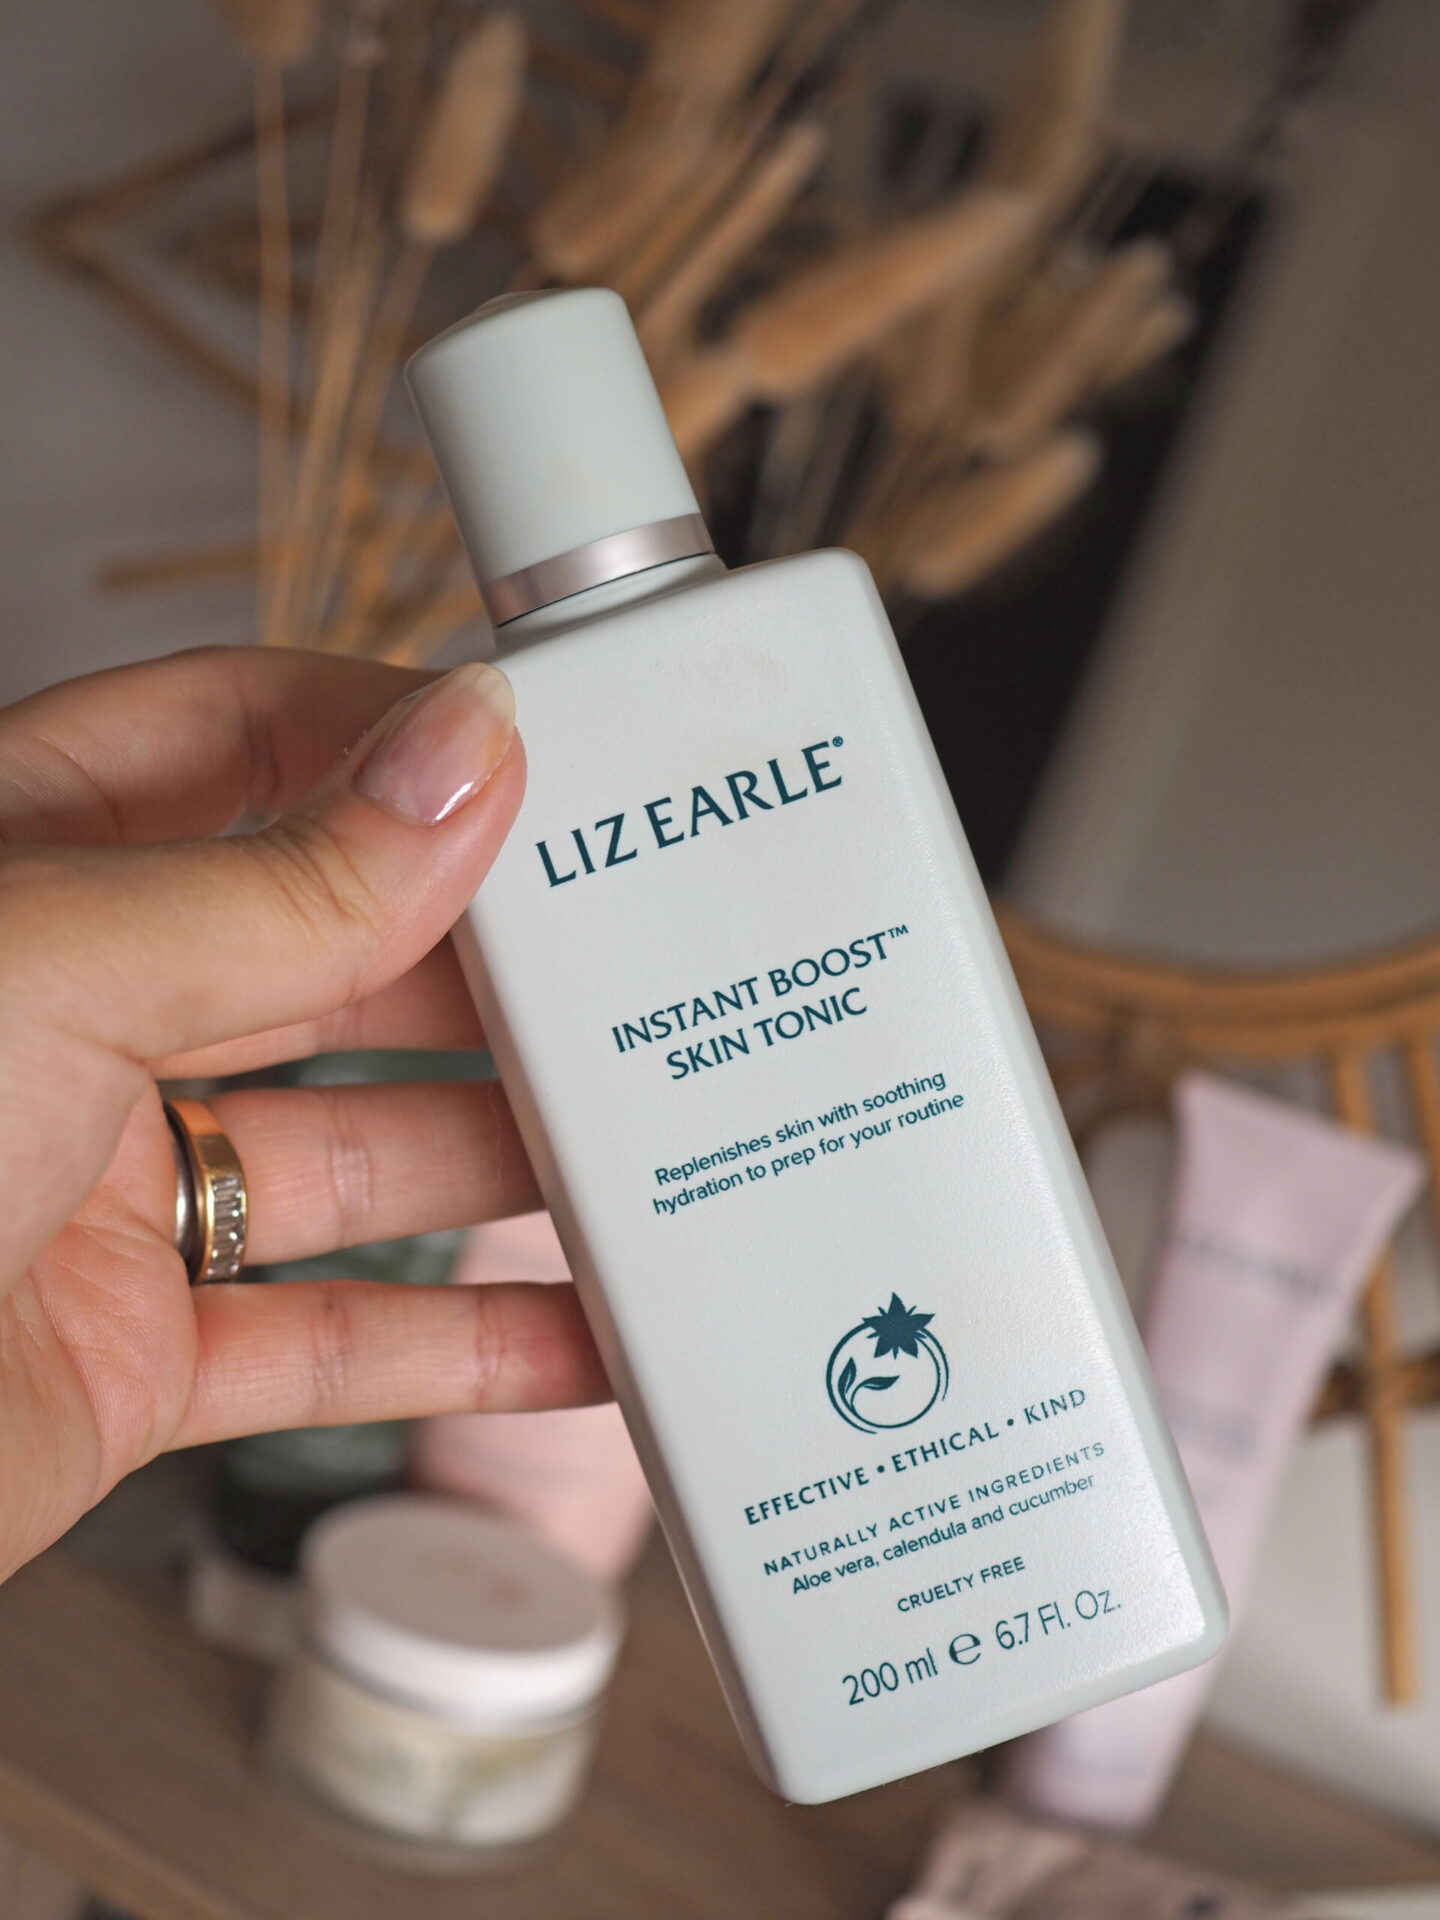 Liz Earle instant boost skin tonic review